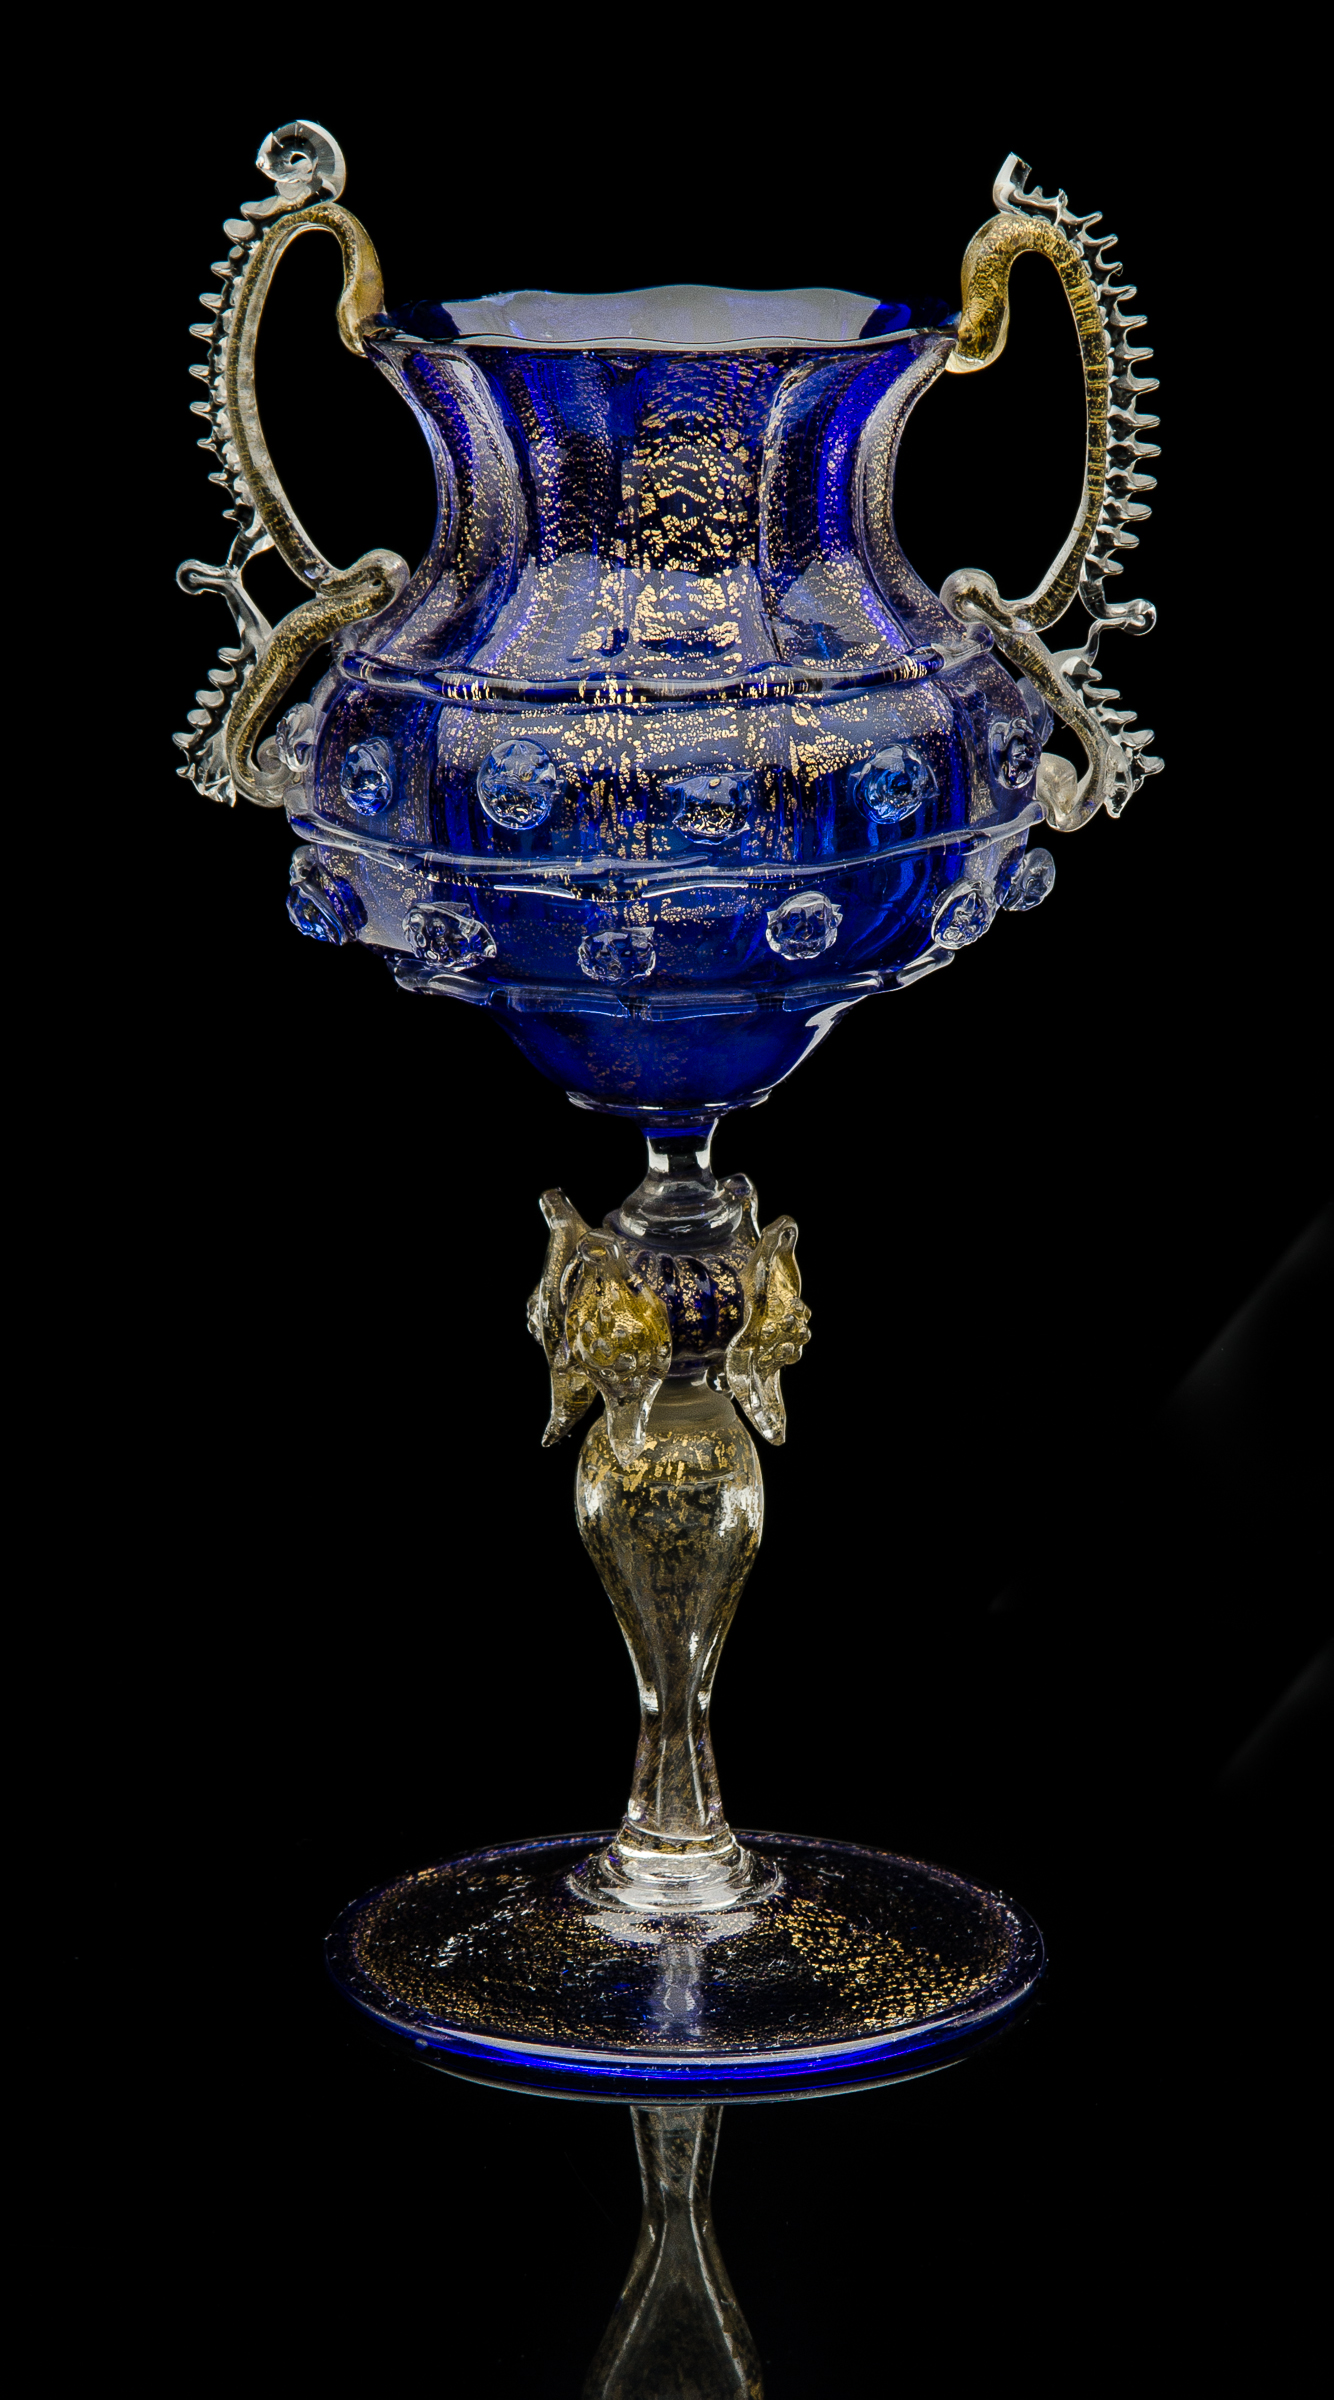  Fratelli Toso,  Cobalt Blue Double Handled Vase with Aventurine  (1885, glass, 7.5 inches), VV.209 